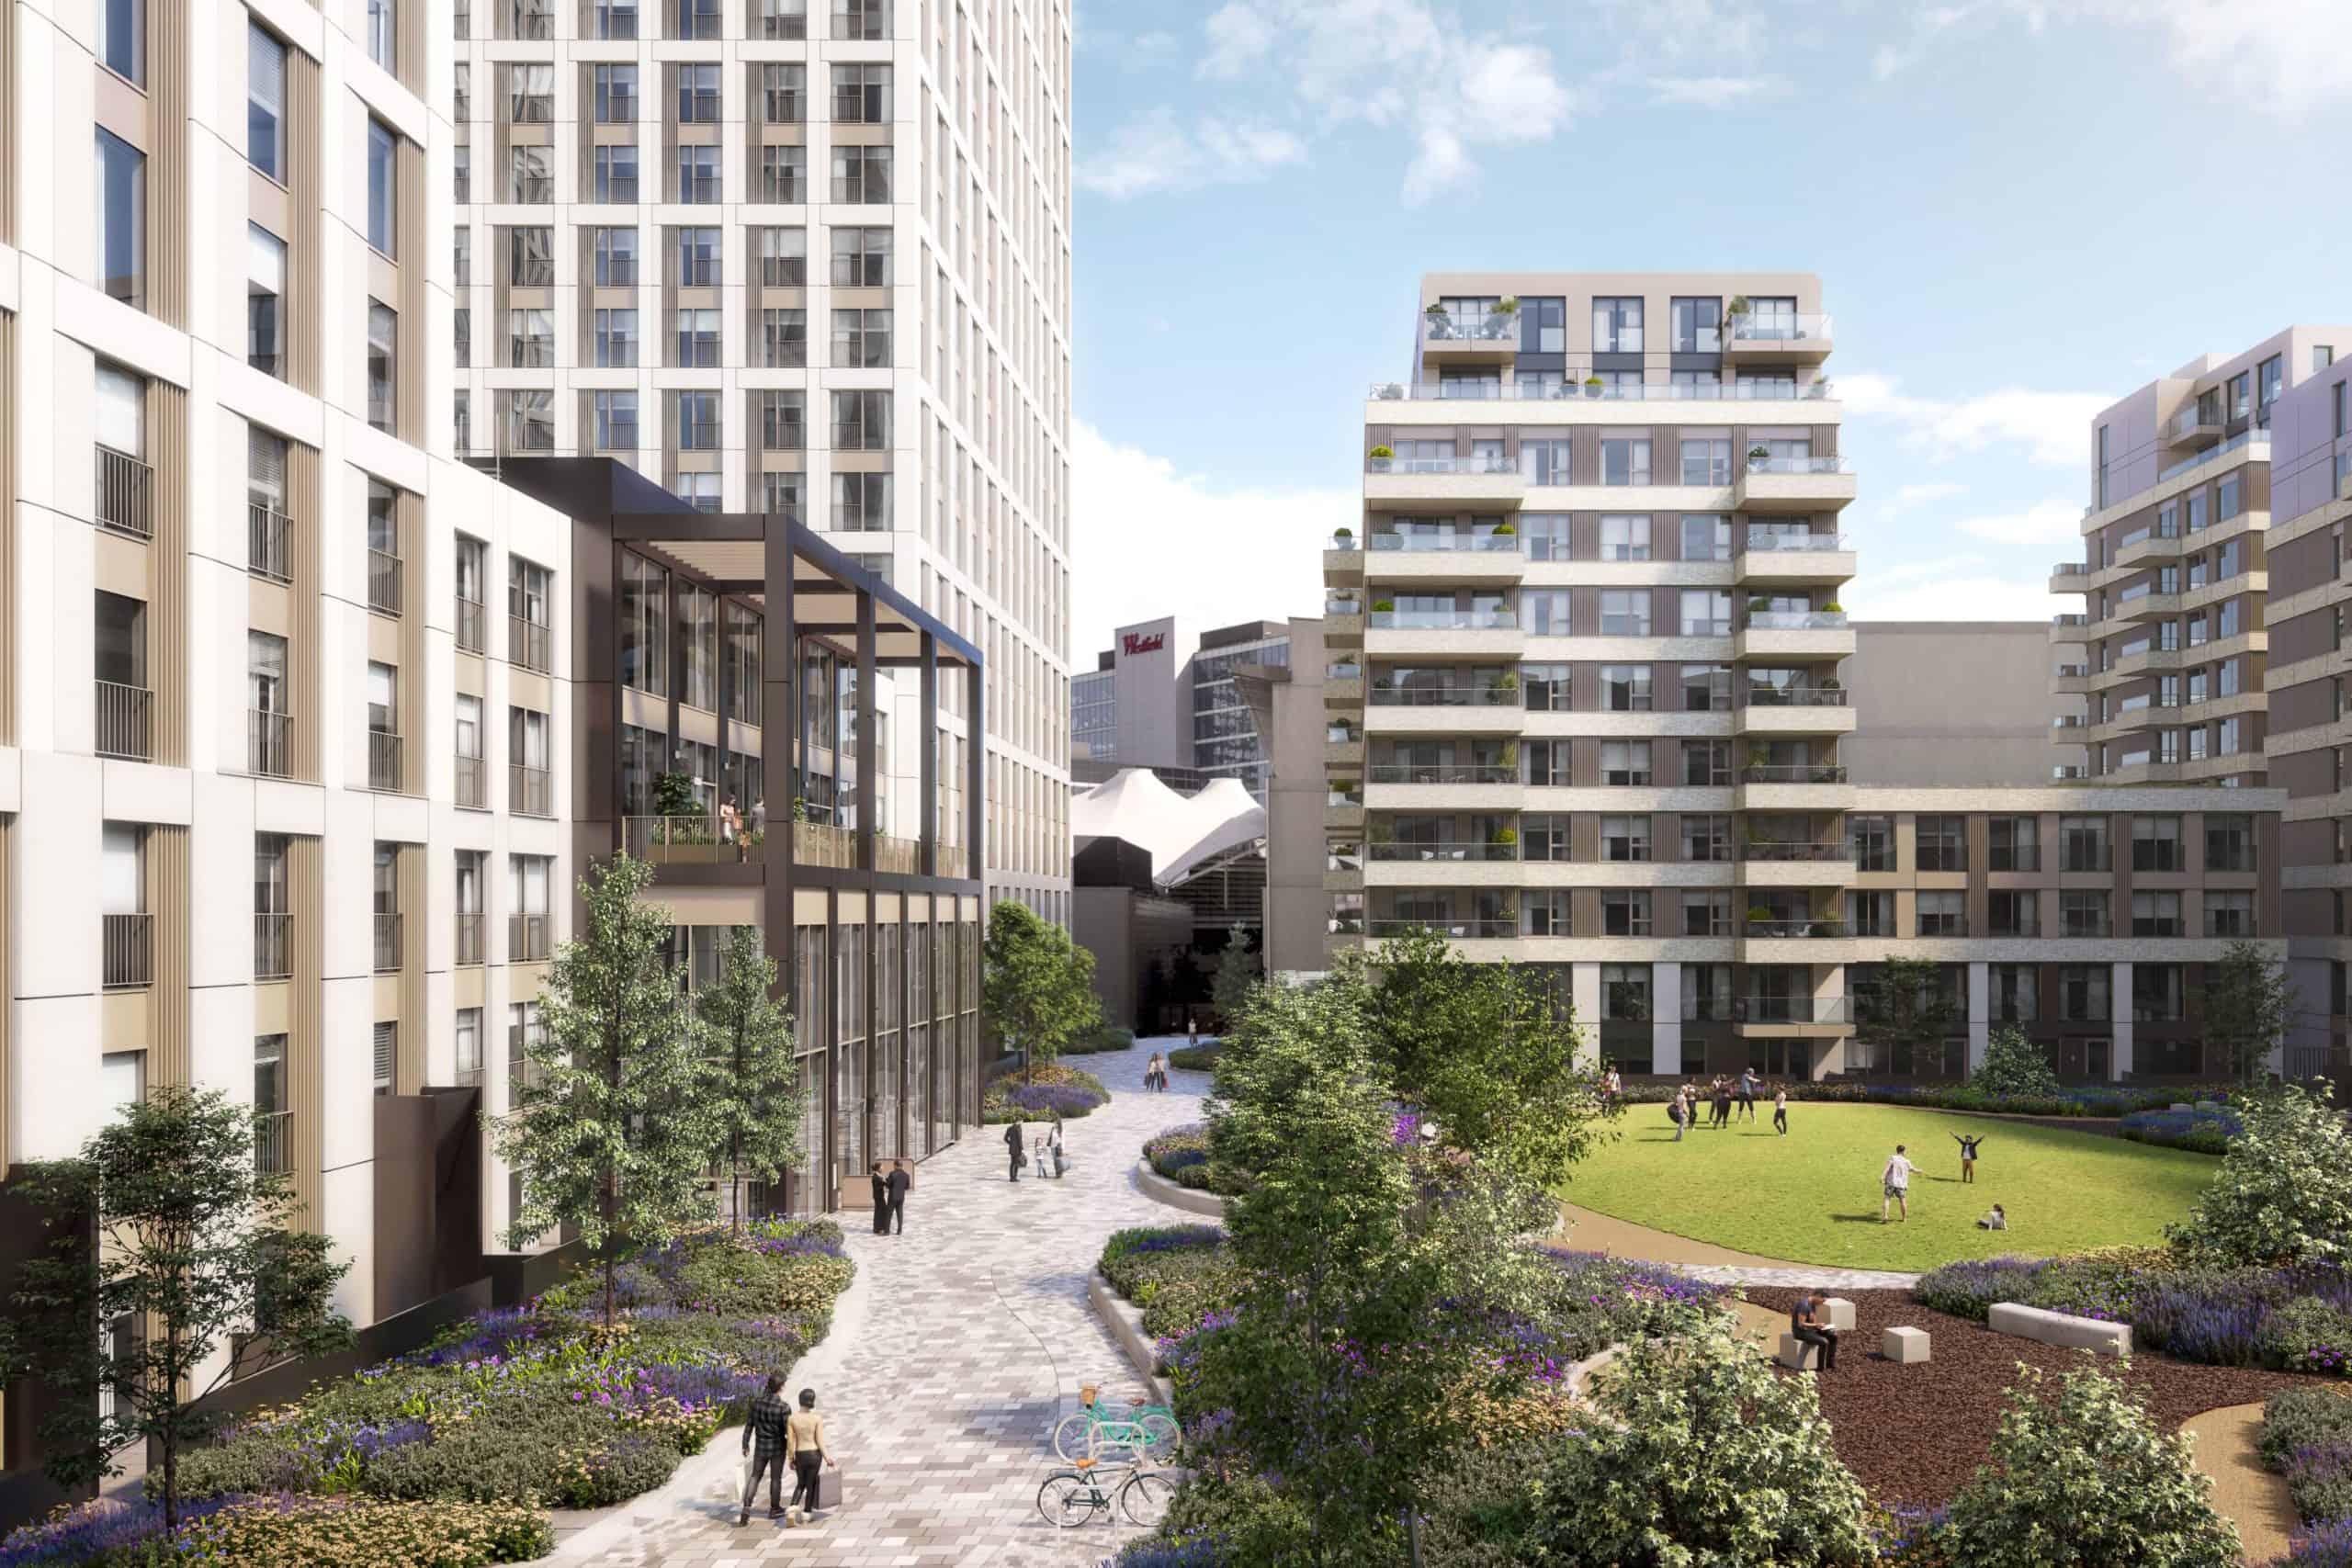 Opening date for first phase of Coppermaker Square Build-to-Rent development at Stratford announced